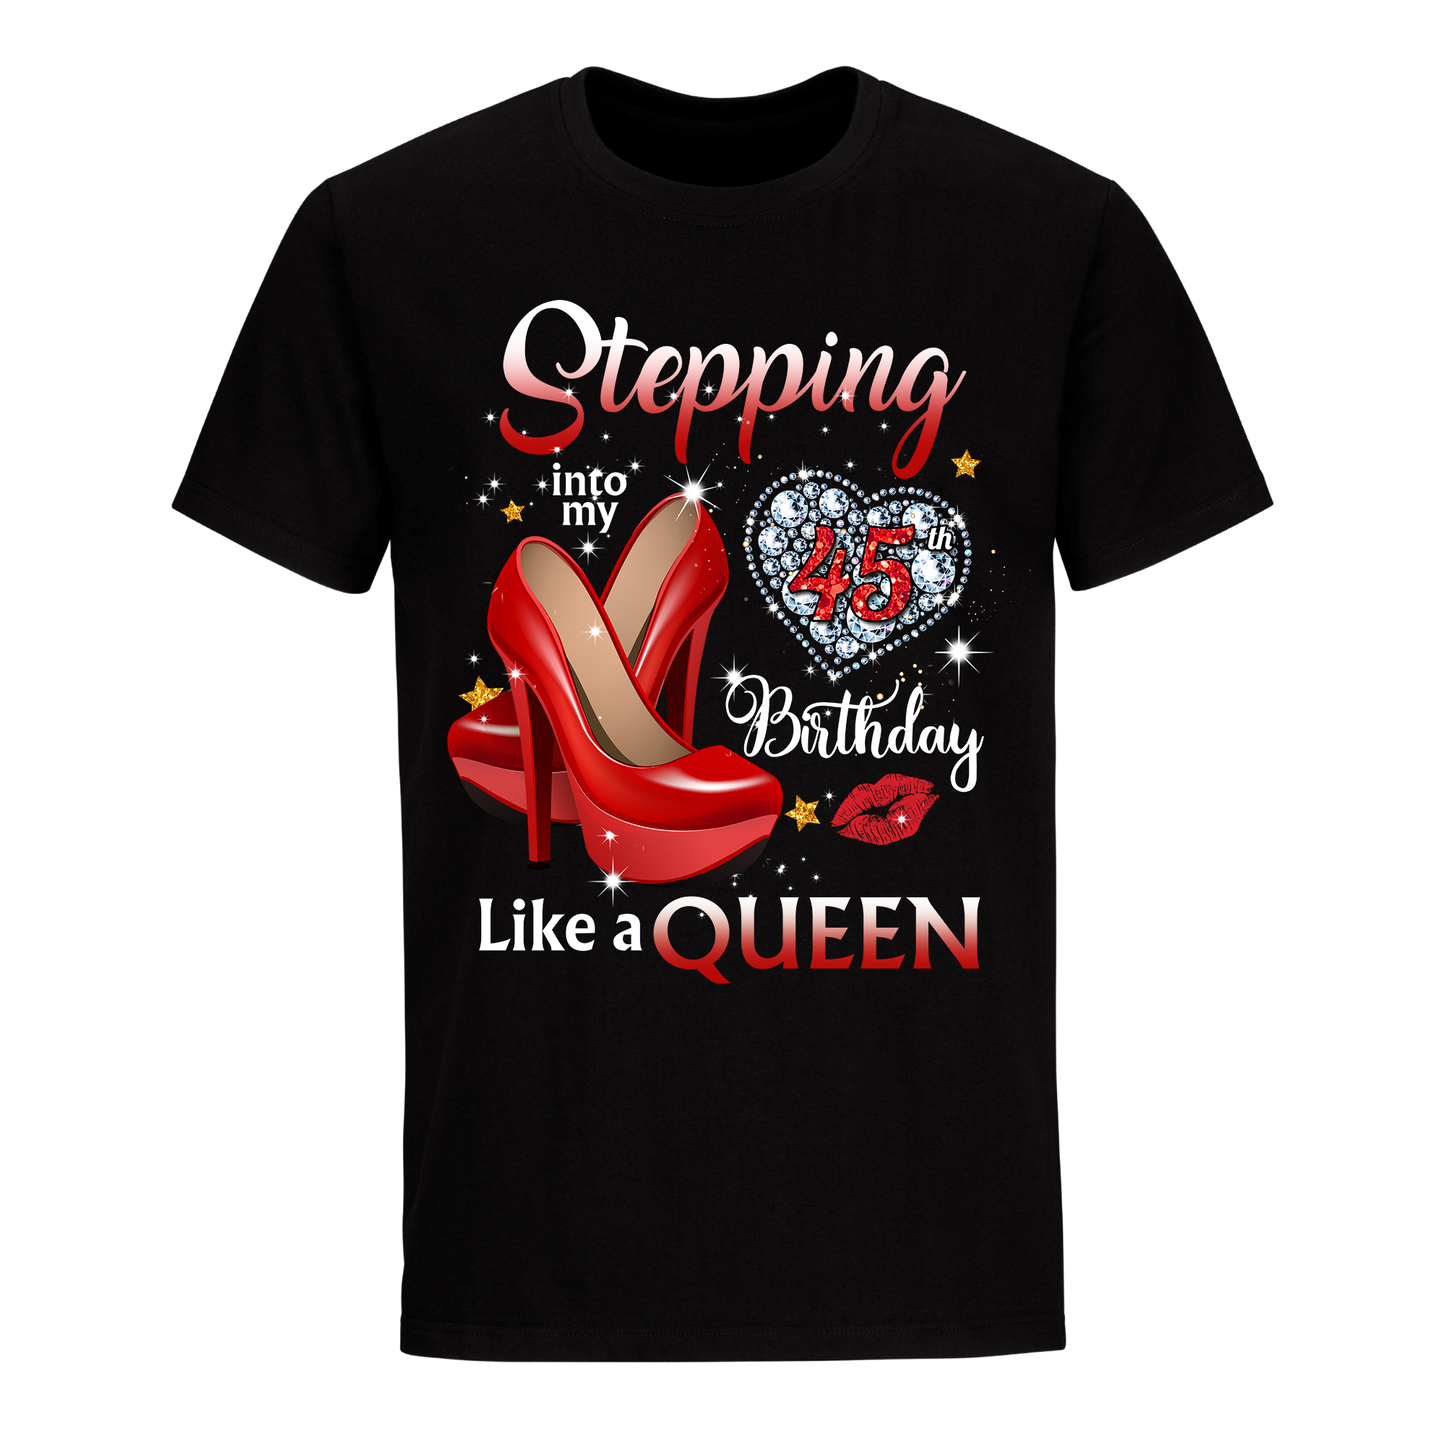 QUEEN STEPPING INTO FORTY FIVE UNISEX SHIRT